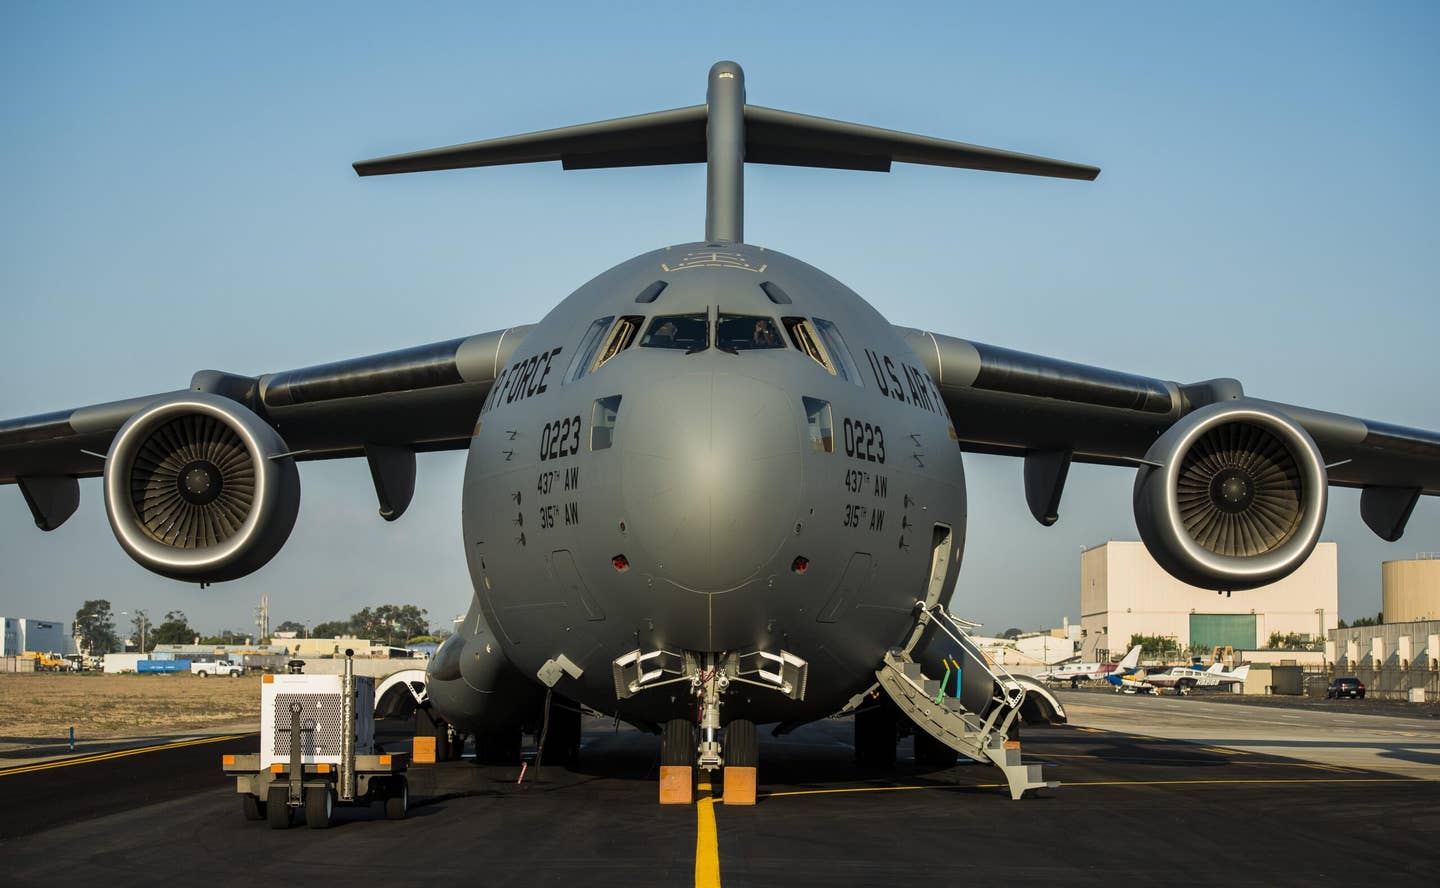 The final U.S. Air Force C-17A Globemaster III, P-223, is rolled off the Boeing assembly line and placed on the flight line during a ceremony celebrating 20 years of delivering C-17s to the U.S. Air Force, on September 12, 2013, at Long Beach, California. <em>U.S. Air Force photo/ Senior Airman Dennis Sloan</em>